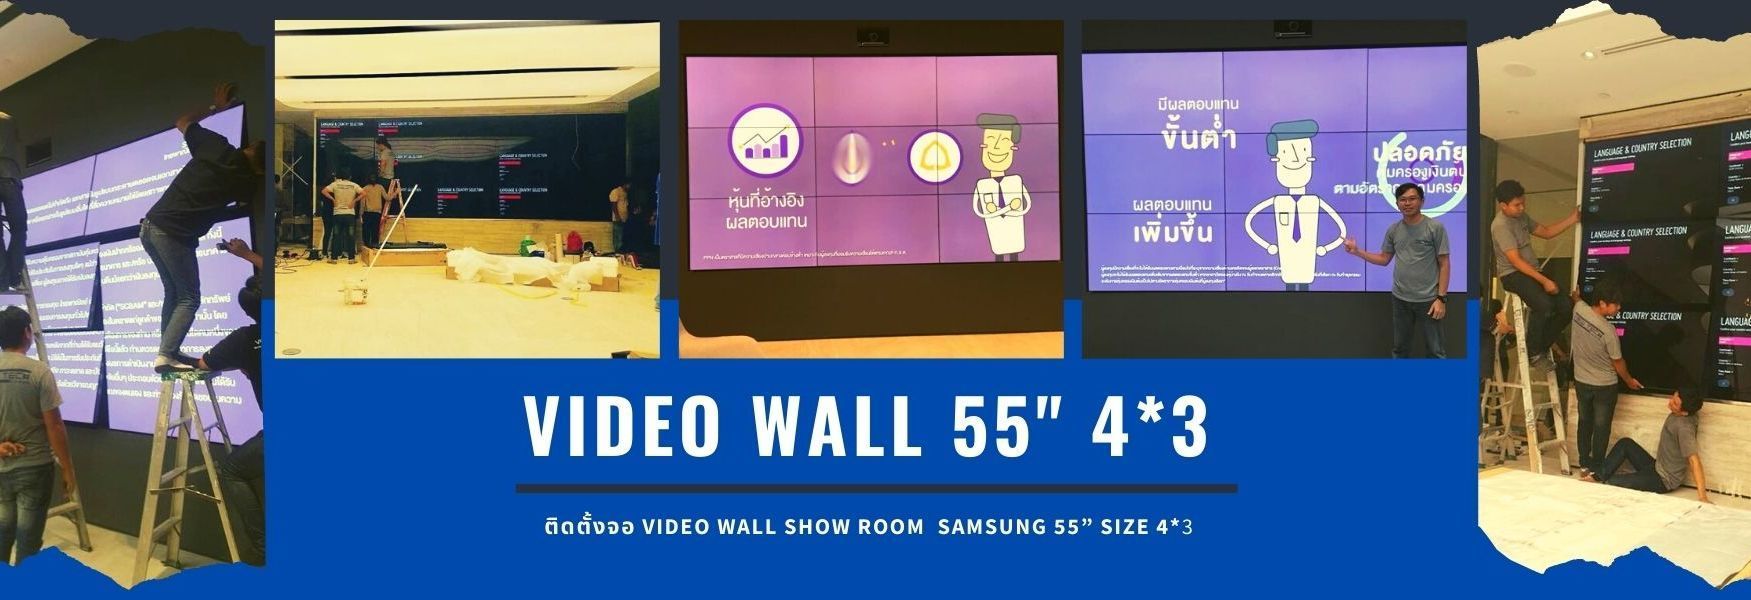  Video Wall SHOW ROOM  SAMSUNG 55” SIZE 4*3